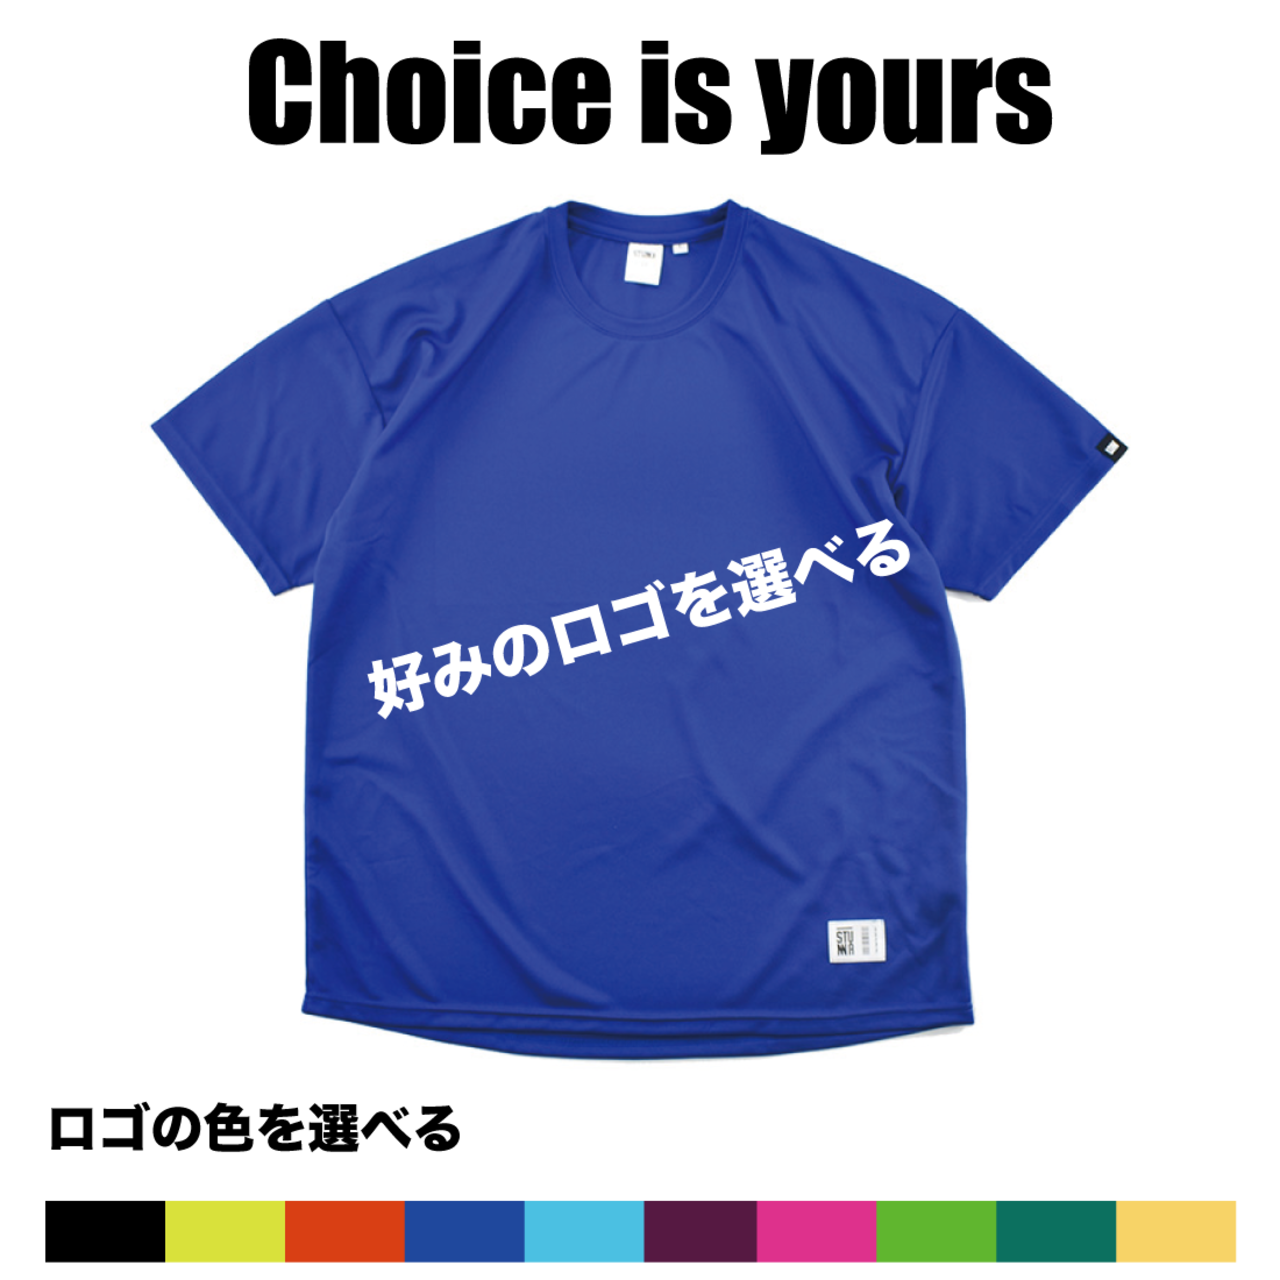 Choice is yours T-shirts : ディープブルー : ロゴ選択、ロゴ色選択、